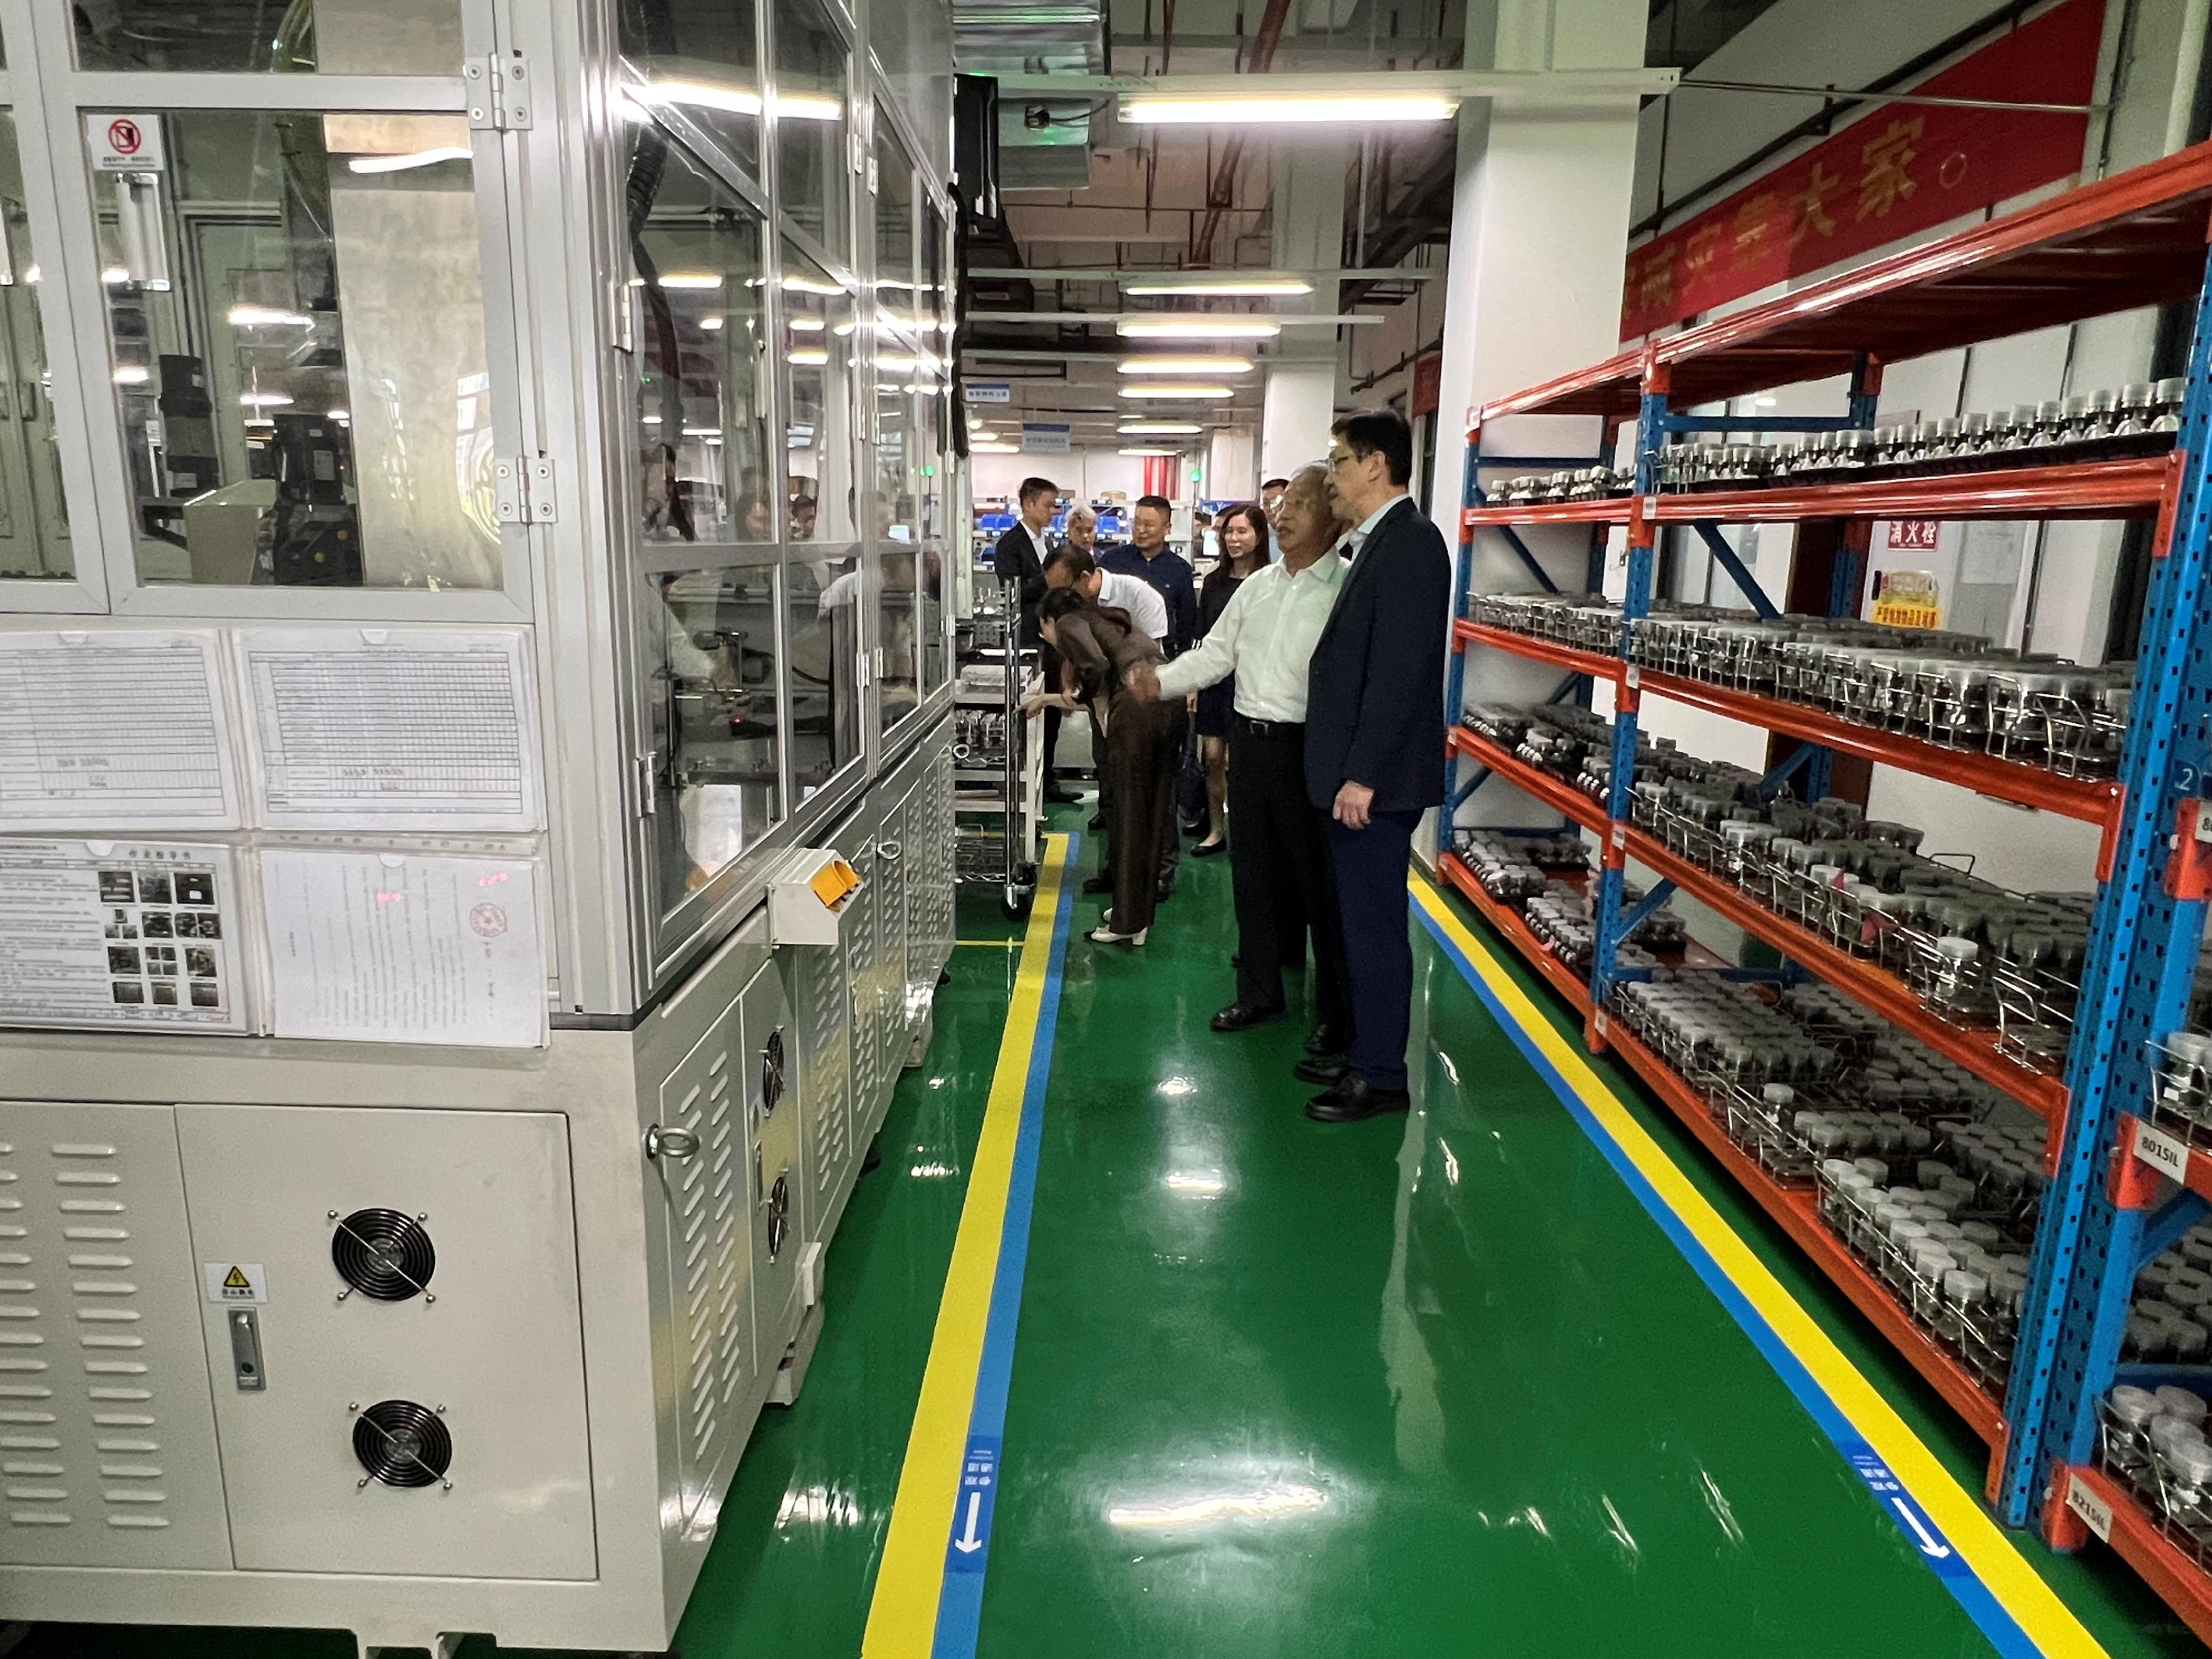 The Secretary for Innovation, Technology and Industry, Professor Sun Dong (first right), tours the smart production lines of the Chongqing Silian Measure & Control Technology Company Limited today (May 12) in Chongqing to learn about the operation of the production lines.